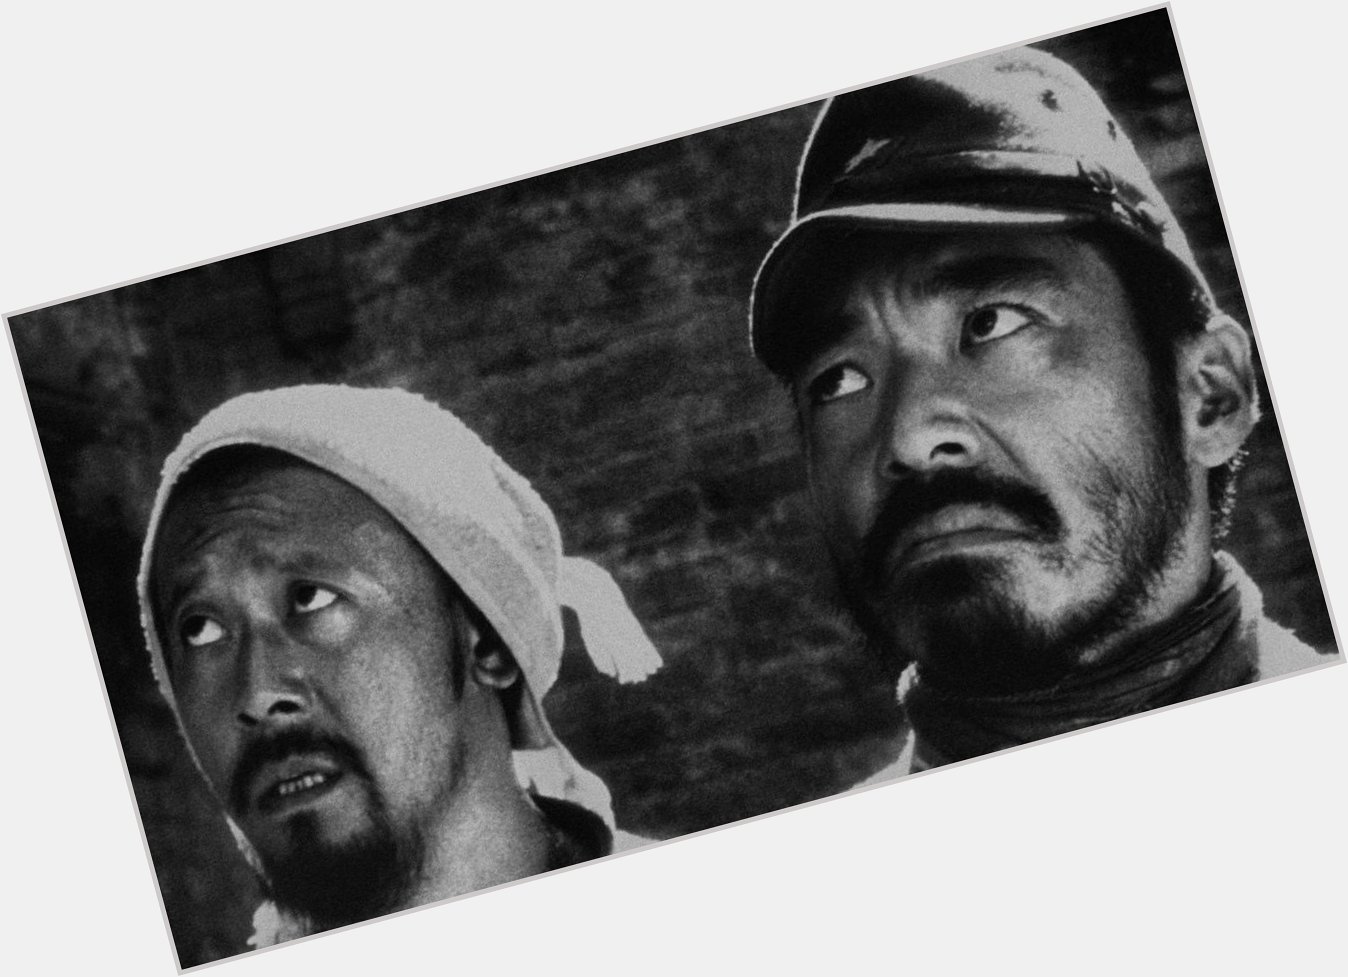 Happy birthday to one of my all-time favorite directors and actors, Jiang Wen! 